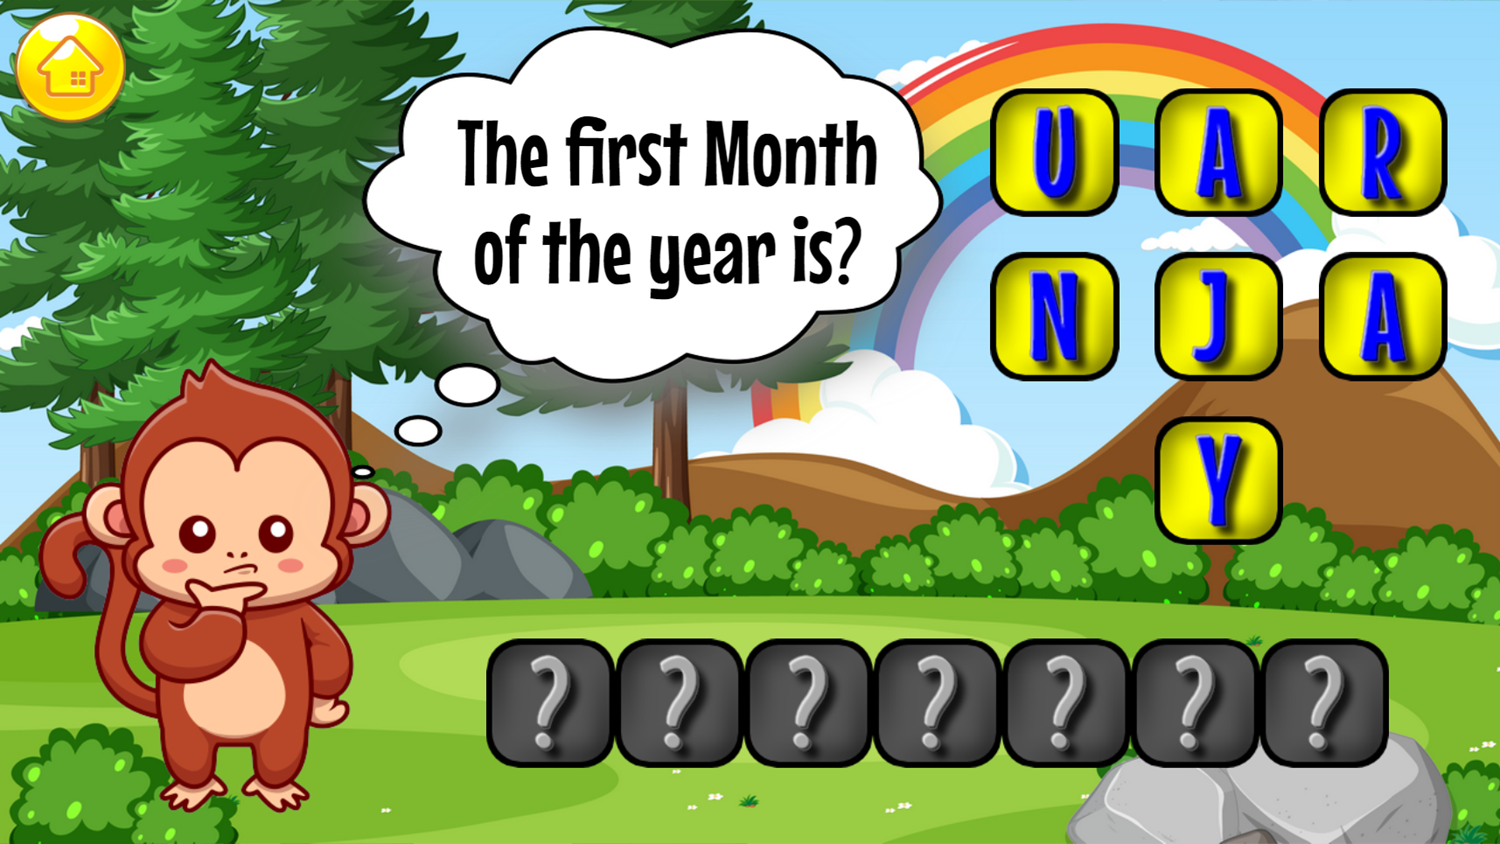 Monkey Trouble Spelling Adventure Game Question Screenshot.